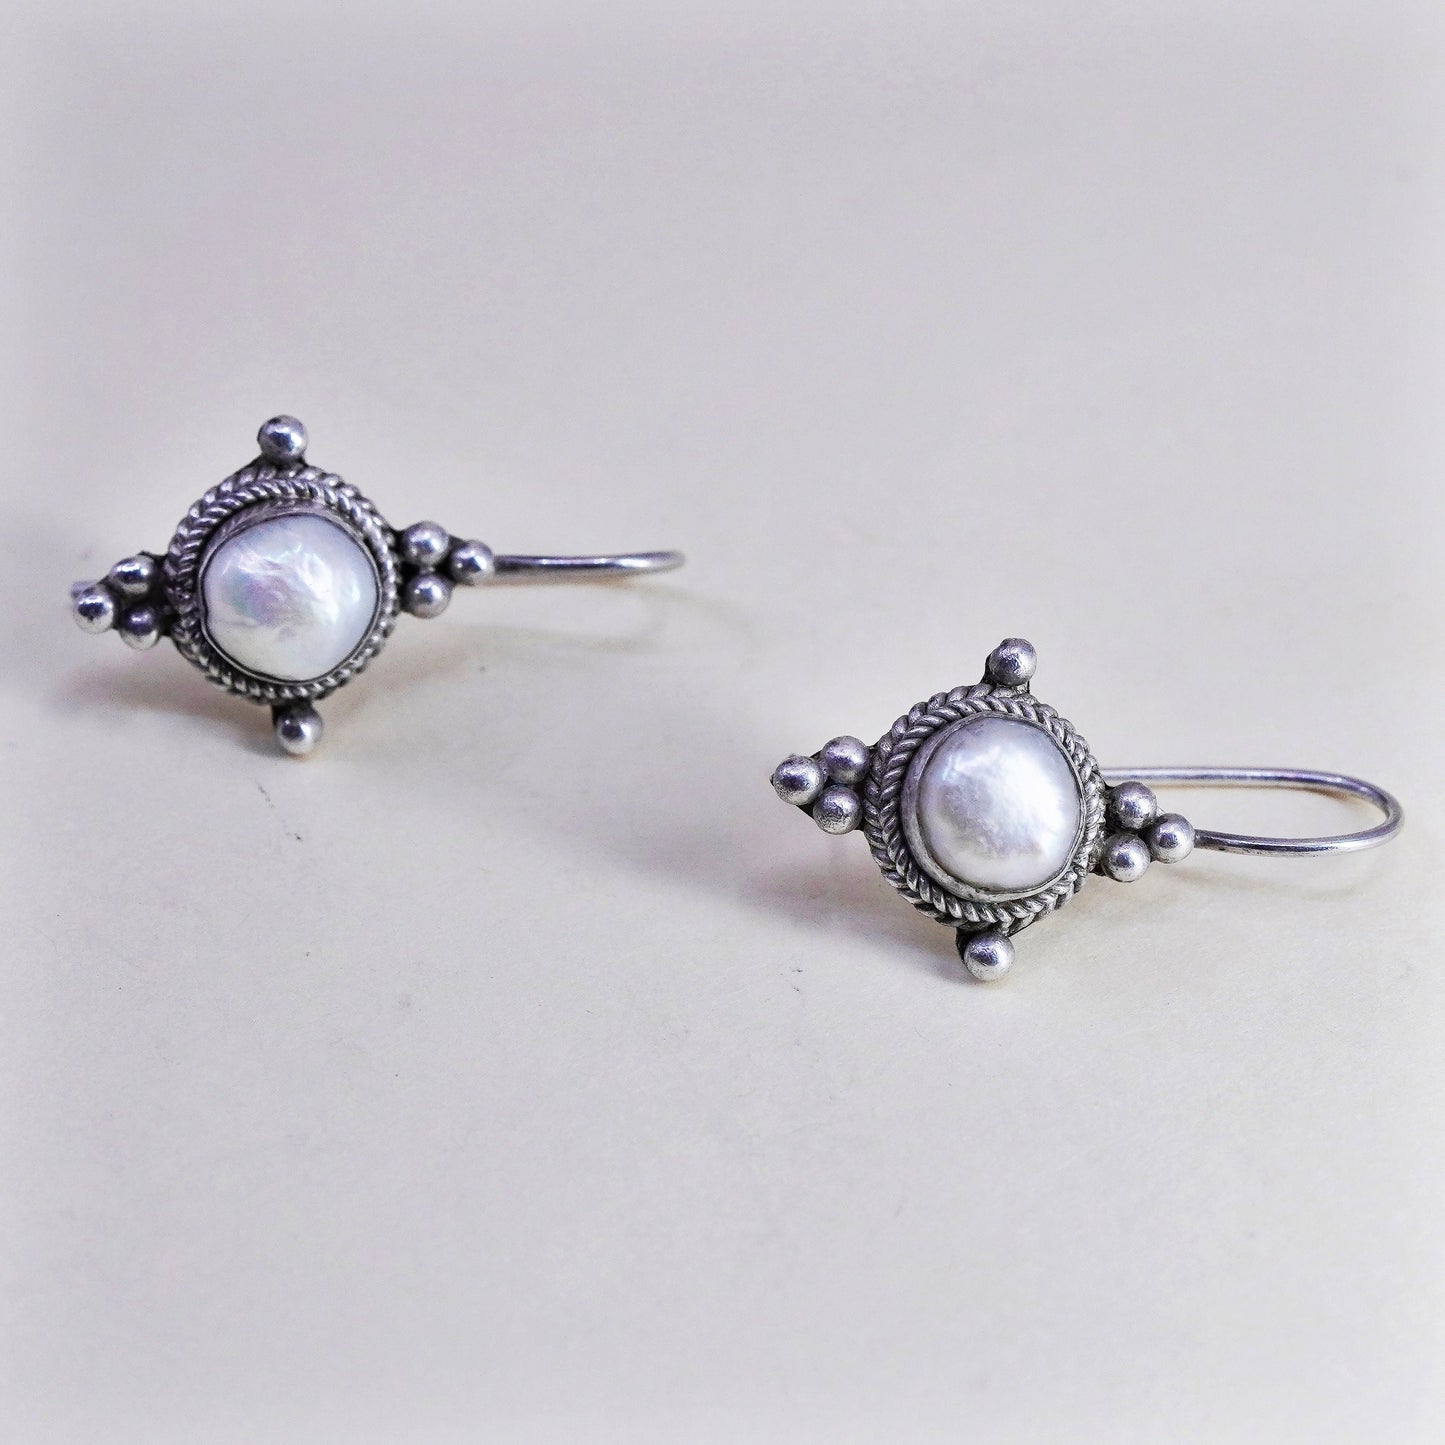 Vintage BA Suarti Sterling 925 silver handmade earrings with pearl and beads